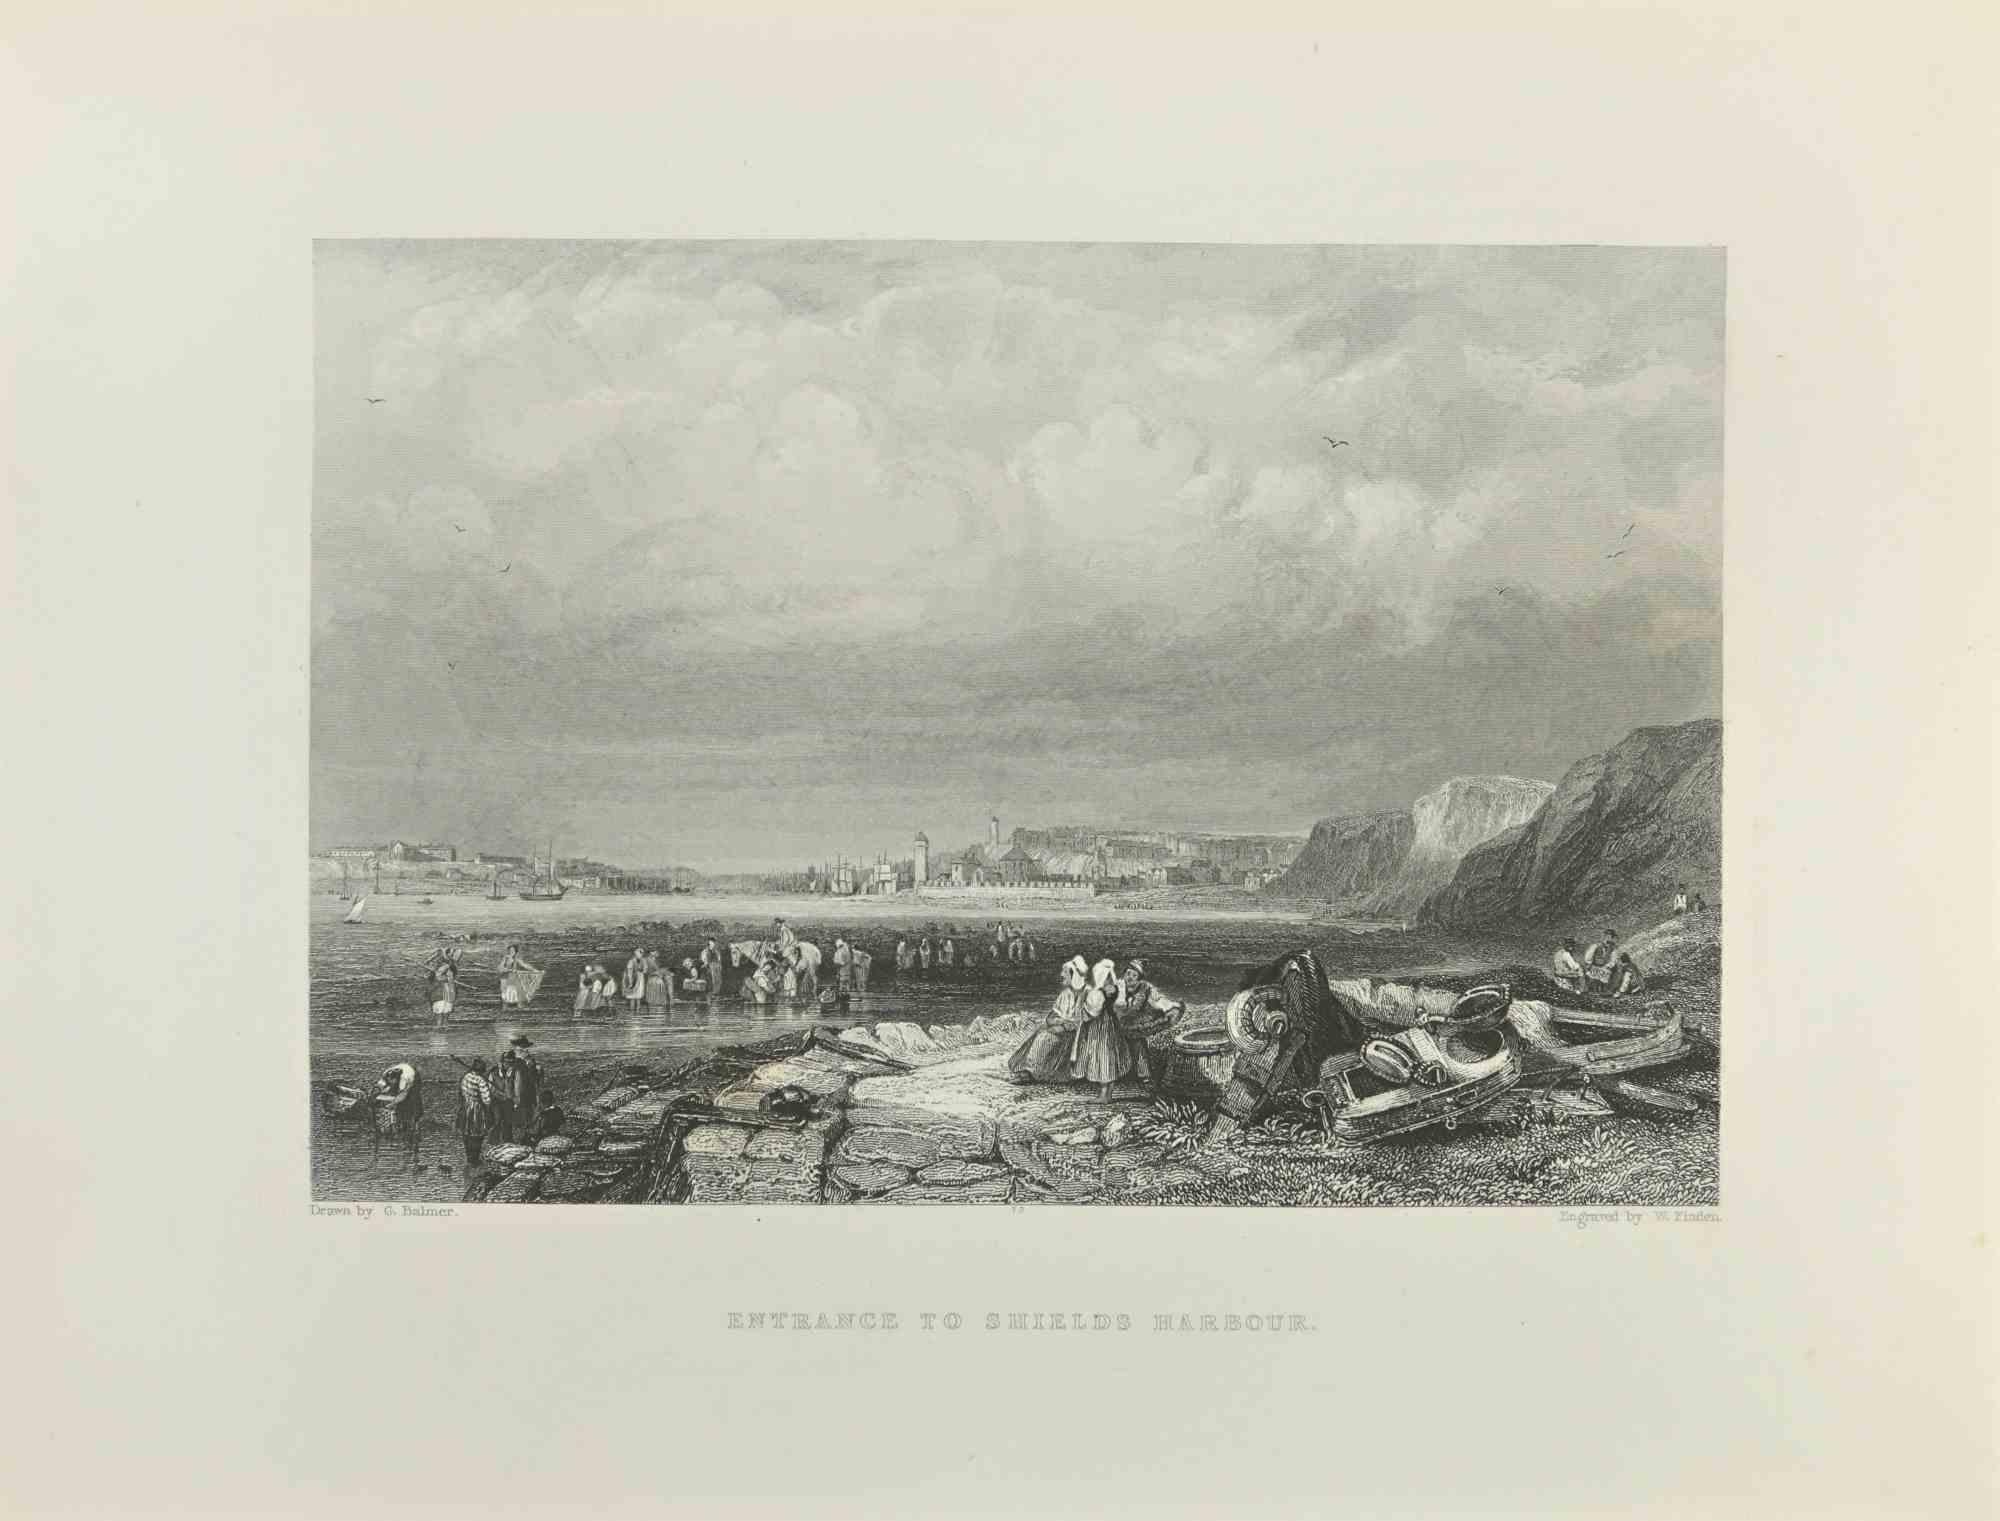 Entrance to Shields Harbour - Engraving by E. Finden - 1845